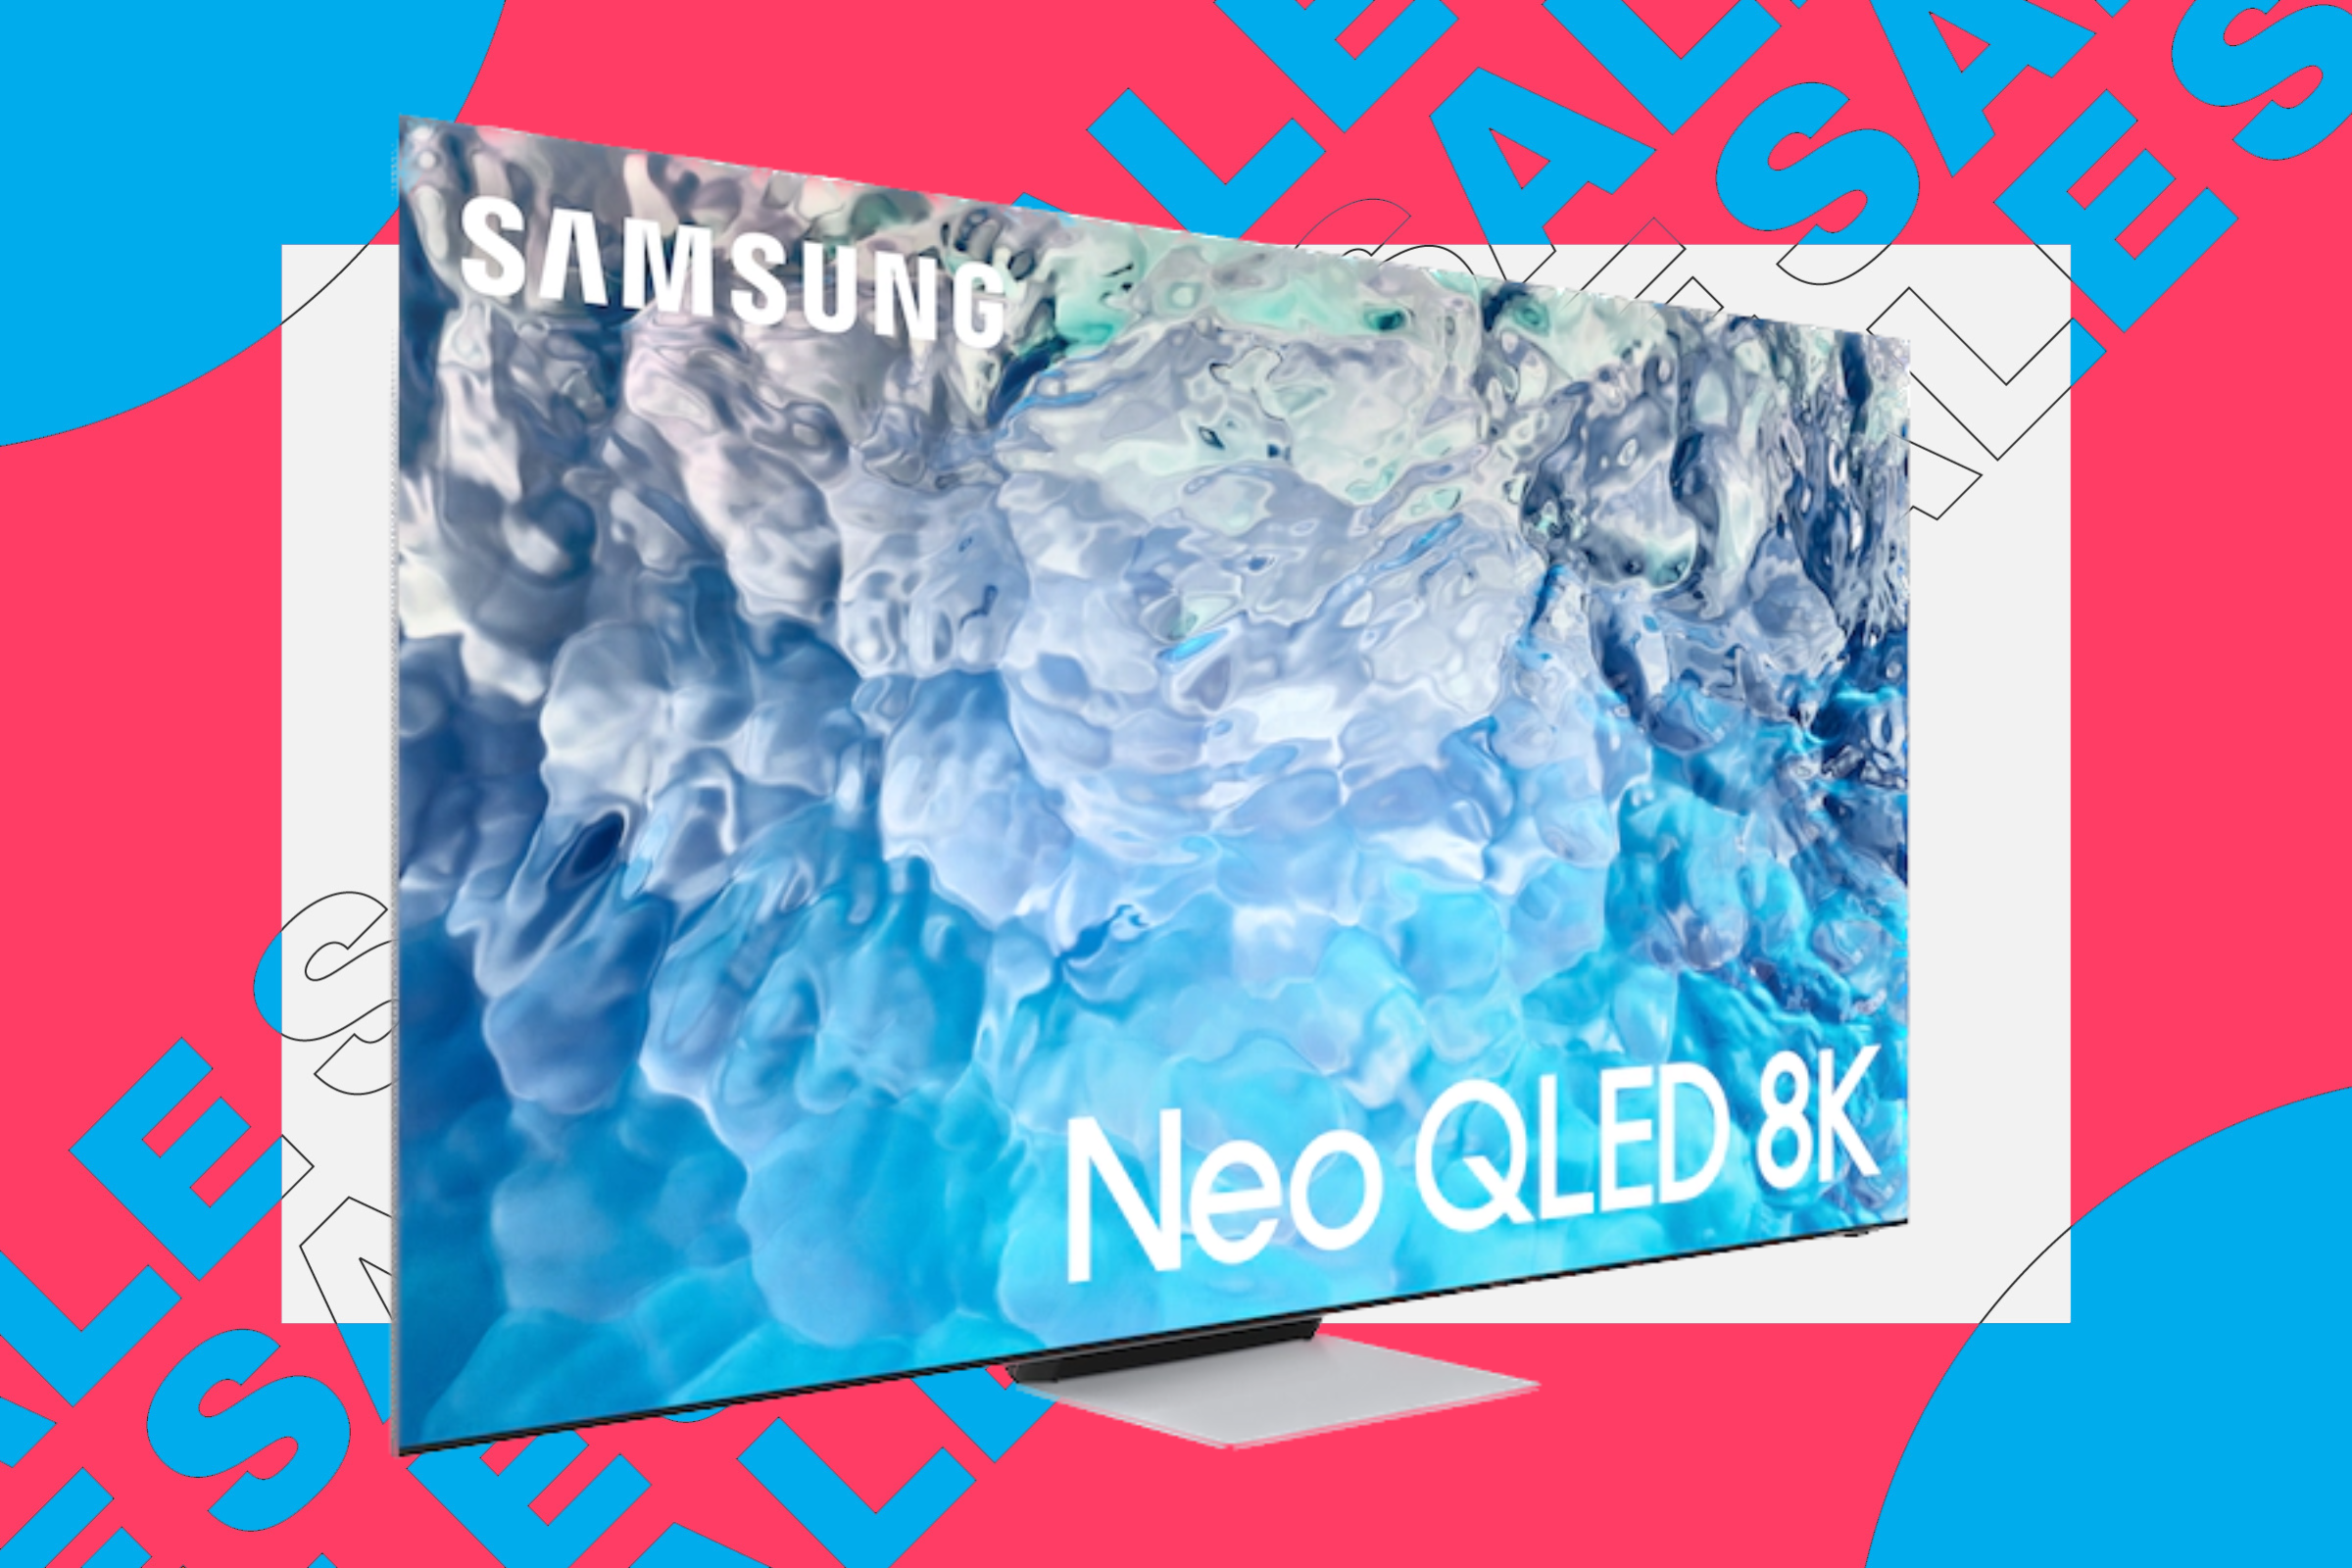 samsung 8K cyber monday deal with sales logo in the background